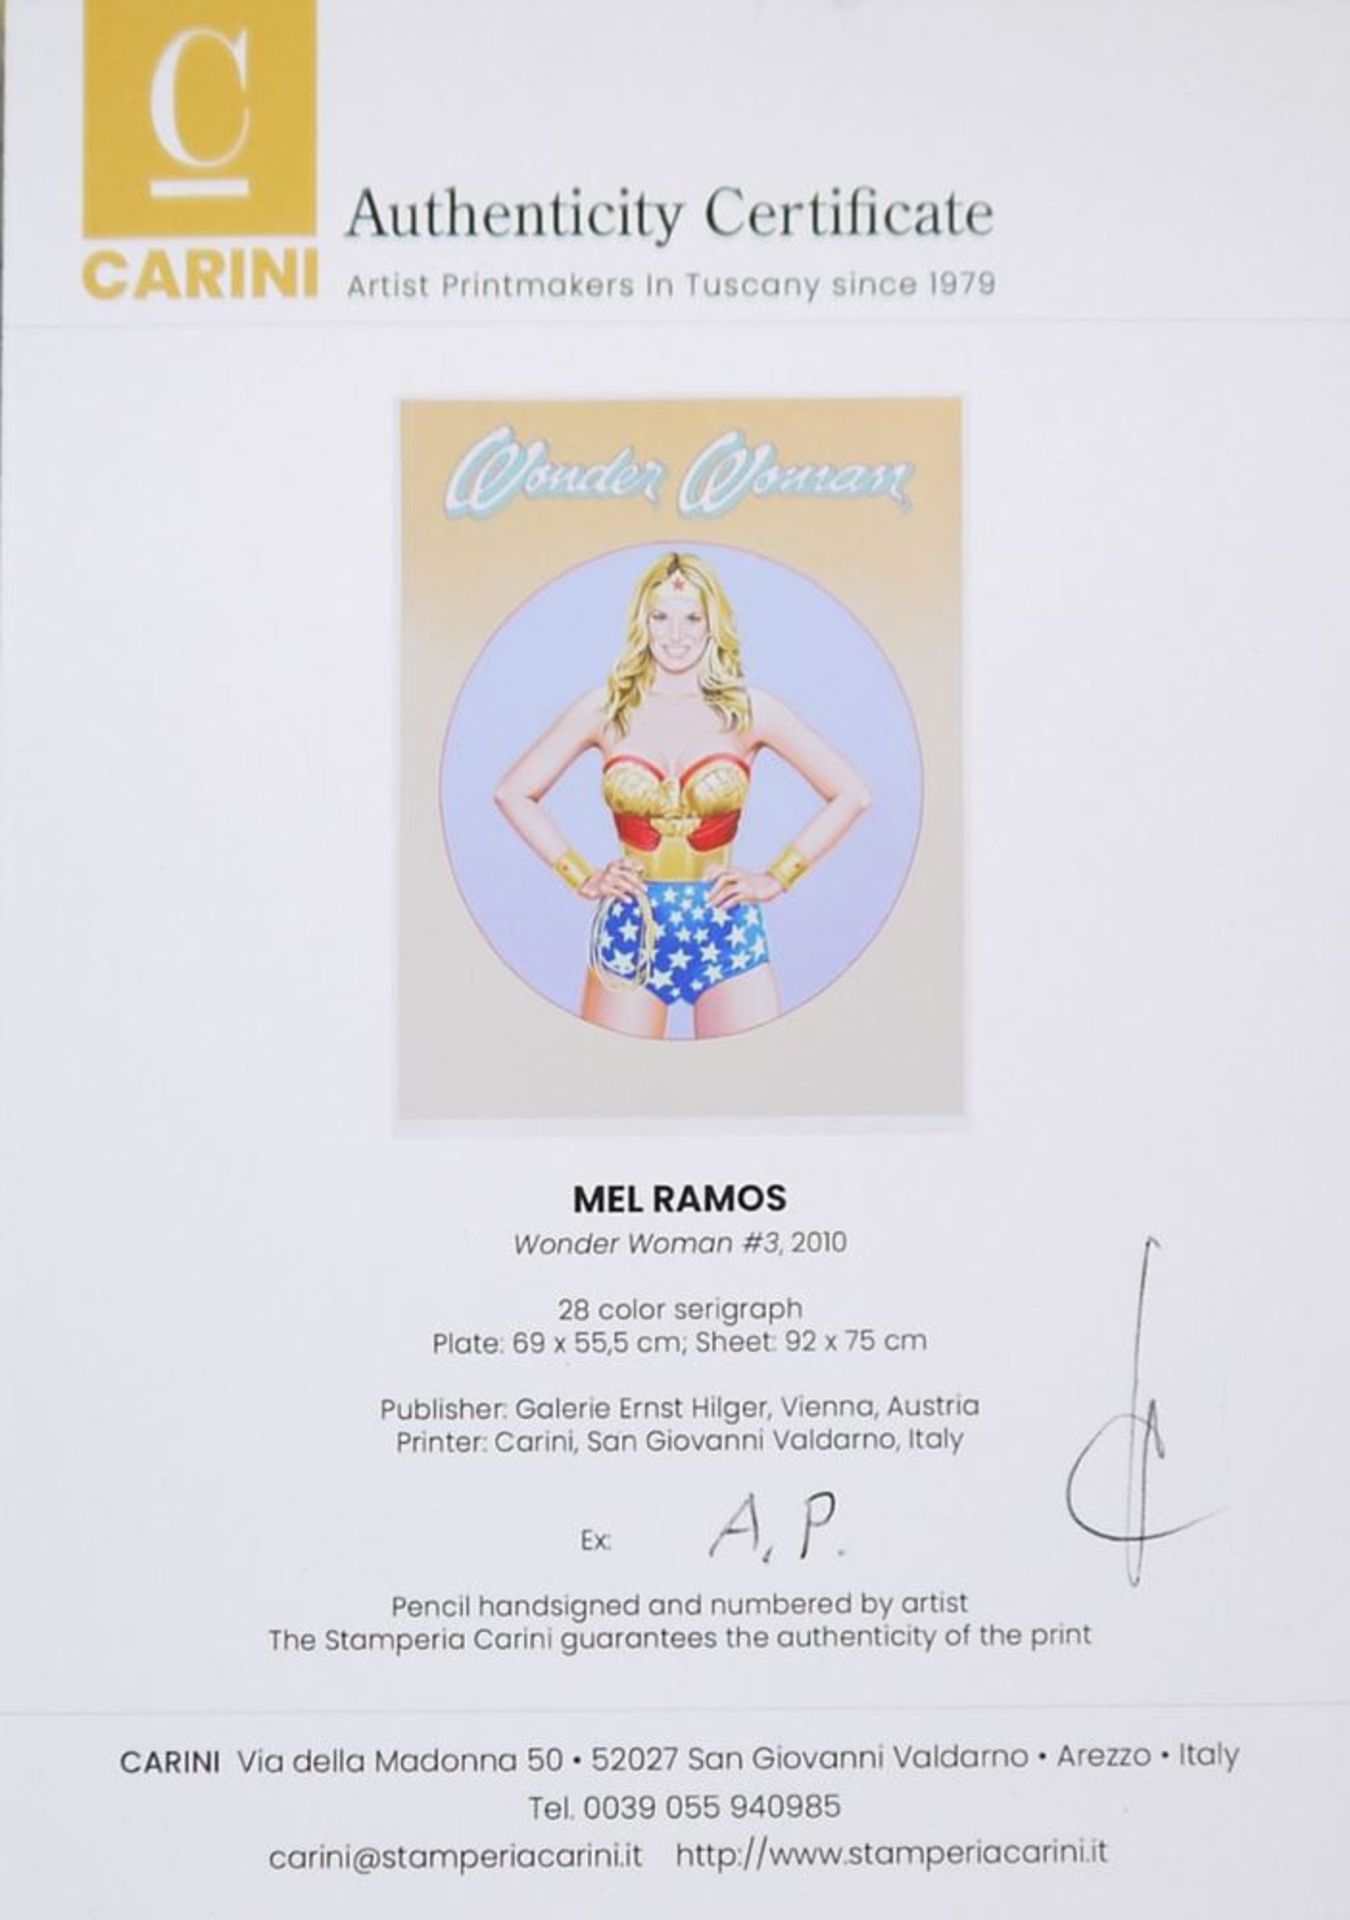 Mel Ramos, "Wonder Woman # 3", colour serigraph from 2010, signed, with Carini certificate - Image 3 of 3